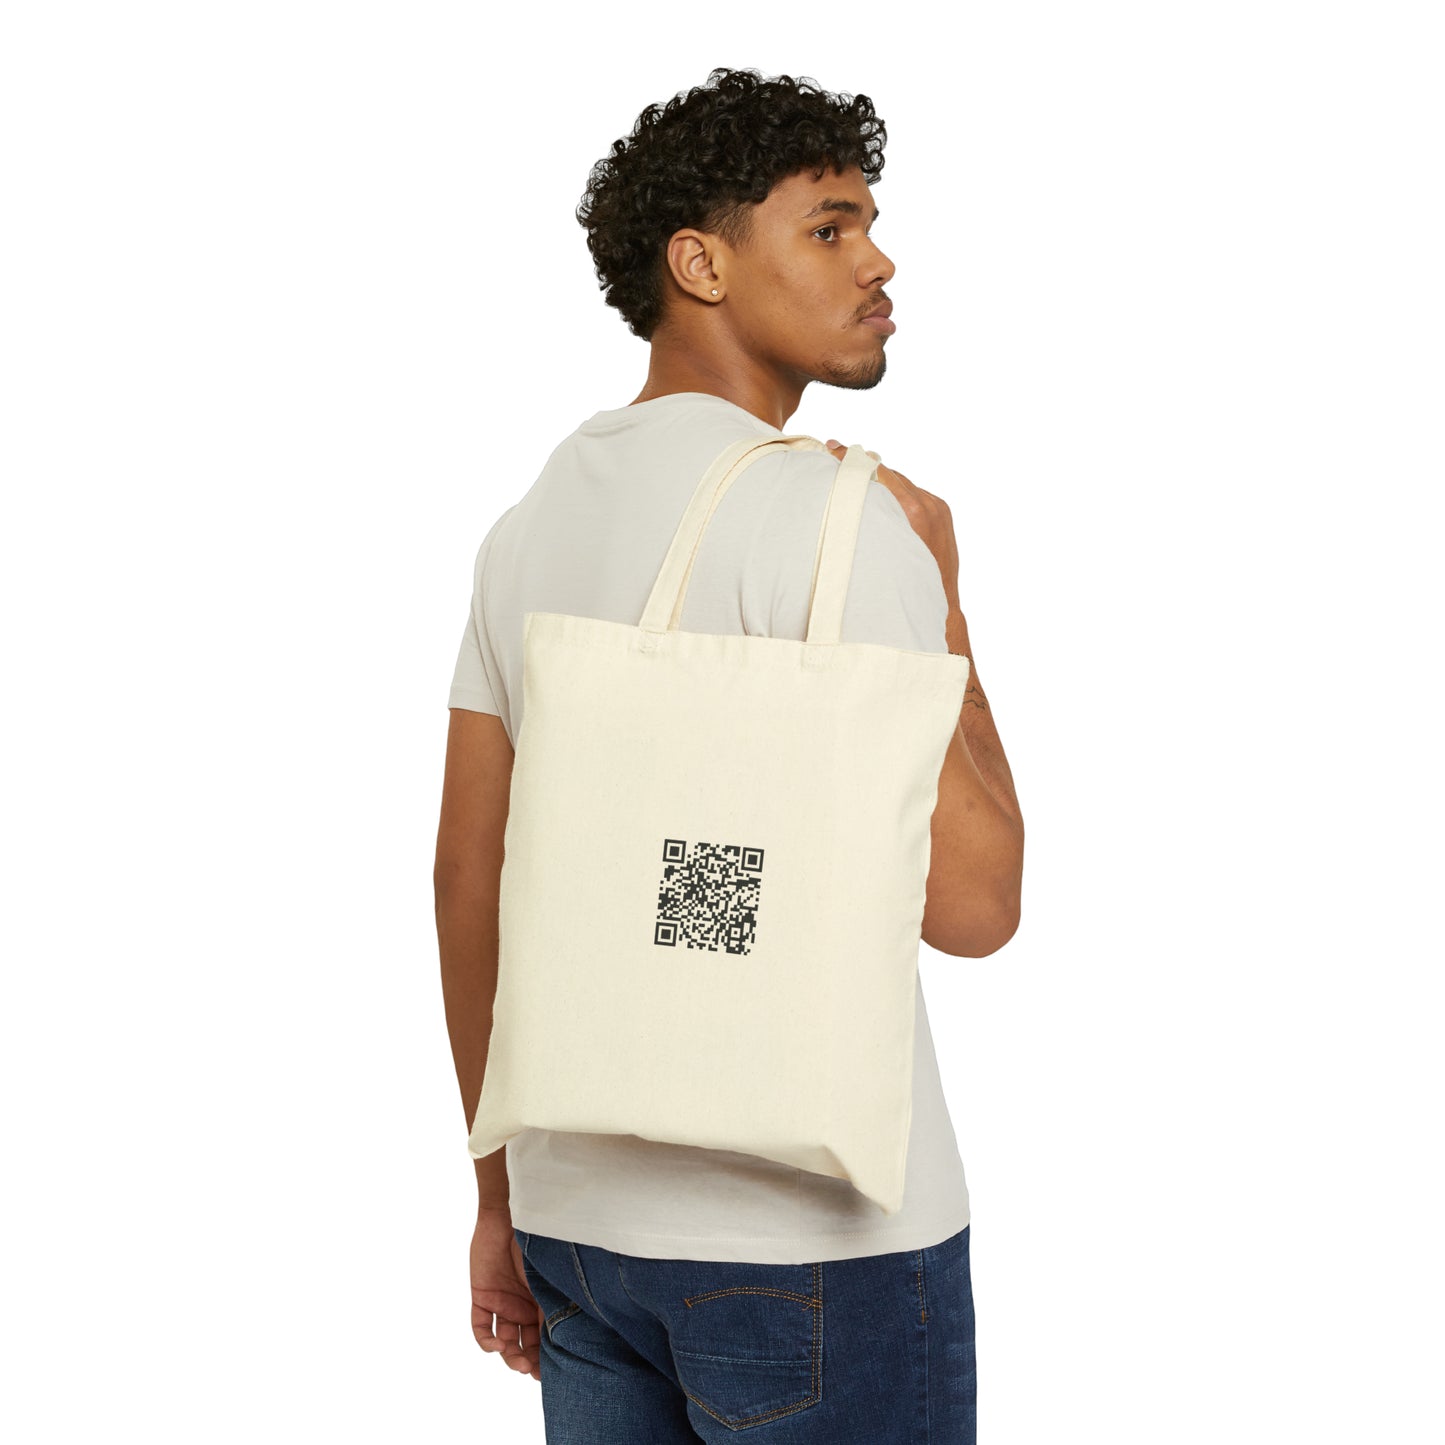 When Links / Blanks / Puzzles Linger - Cotton Canvas Tote Bag